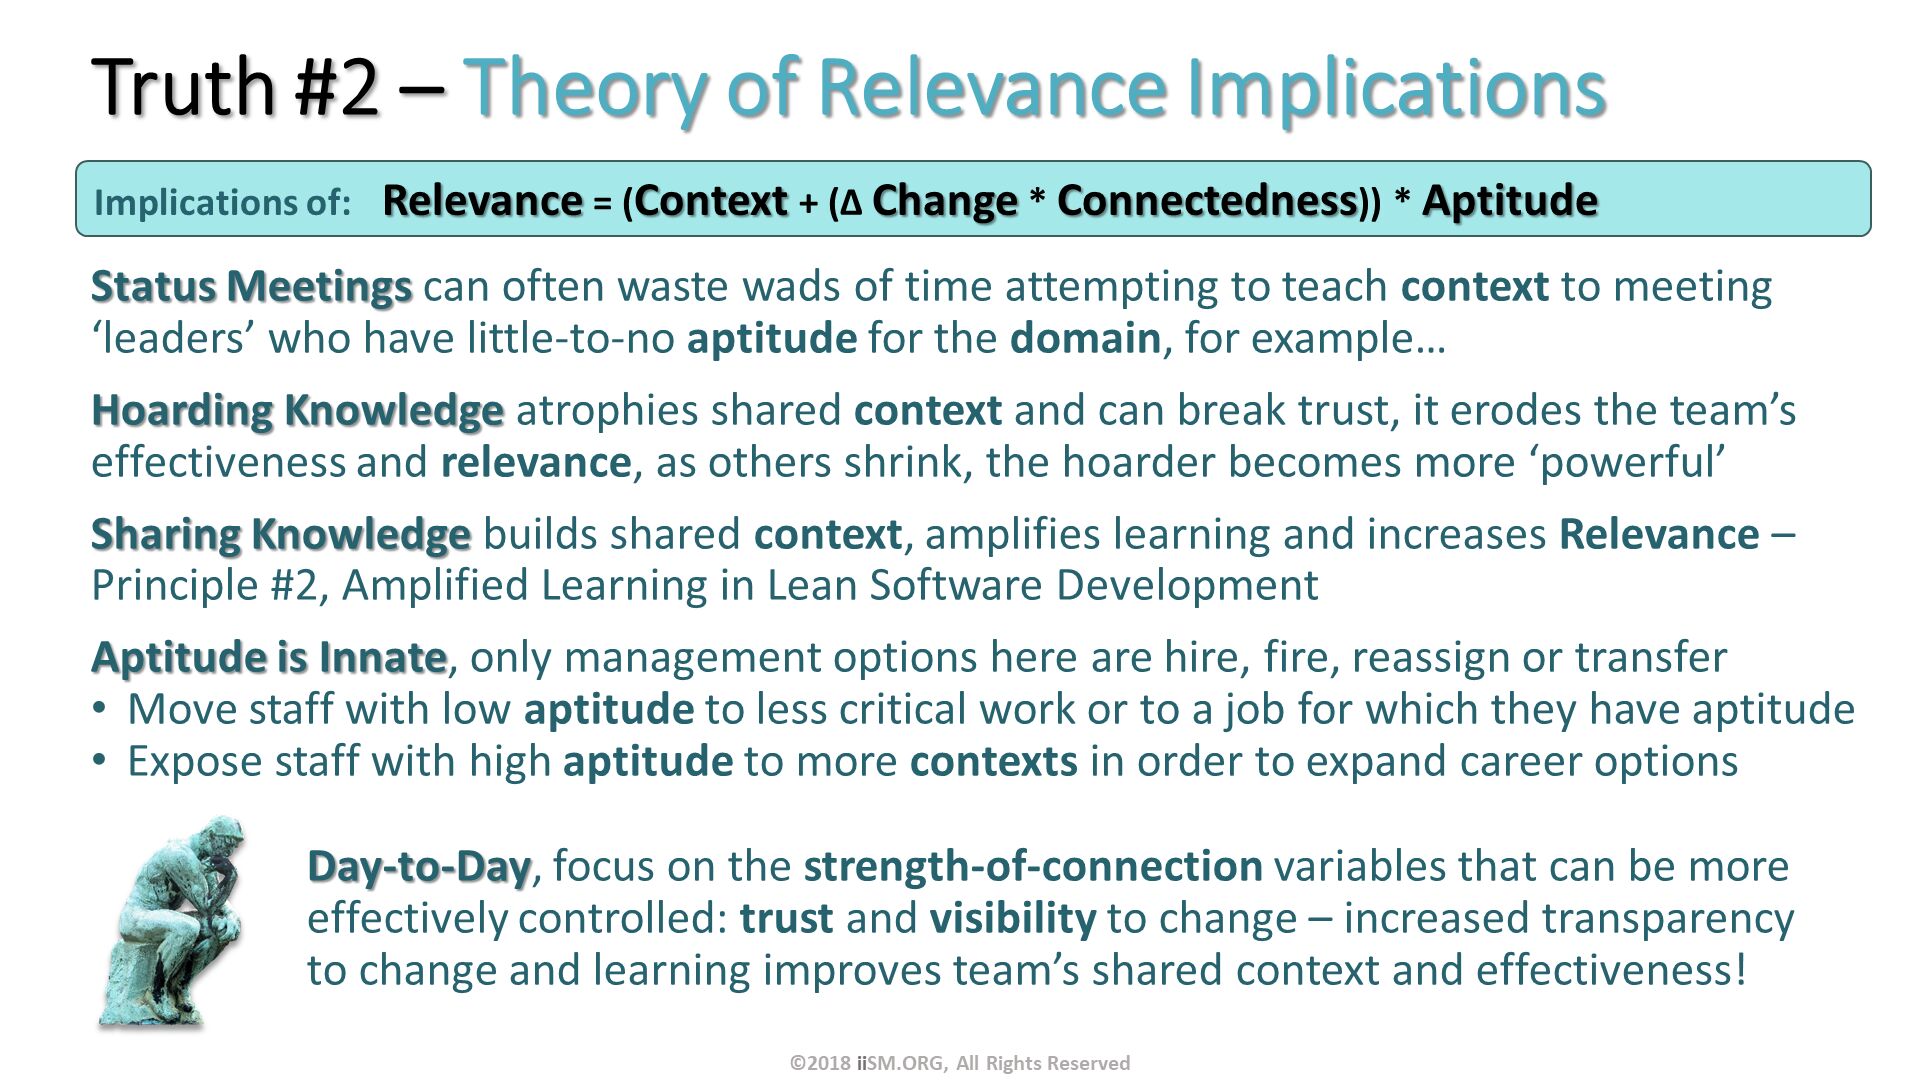 Truth #2 – Theory of Relevance Implications. Status Meetings can often waste wads of time attempting to teach context to meeting ‘leaders’ who have little-to-no aptitude for the domain, for example…
Hoarding Knowledge atrophies shared context and can break trust, it erodes the team’s effectiveness and relevance, as others shrink, the hoarder becomes more ‘powerful’ 
Sharing Knowledge builds shared context, amplifies learning and increases Relevance – Principle #2, Amplified Learning in Lean Software Development
Aptitude is Innate, only management options here are hire, fire, reassign or transfer
Move staff with low aptitude to less critical work or to a job for which they have aptitude
Expose staff with high aptitude to more contexts in order to expand career options
Day-to-Day, focus on the strength-of-connection variables that can be more effectively controlled: trust and visibility to change – increased transparency to change and learning improves team’s shared context and effectiveness!. Implications of:	Relevance = (Context + (∆ Change * Connectedness)) * Aptitude . ©2018 iiSM.ORG, All Rights Reserved. 